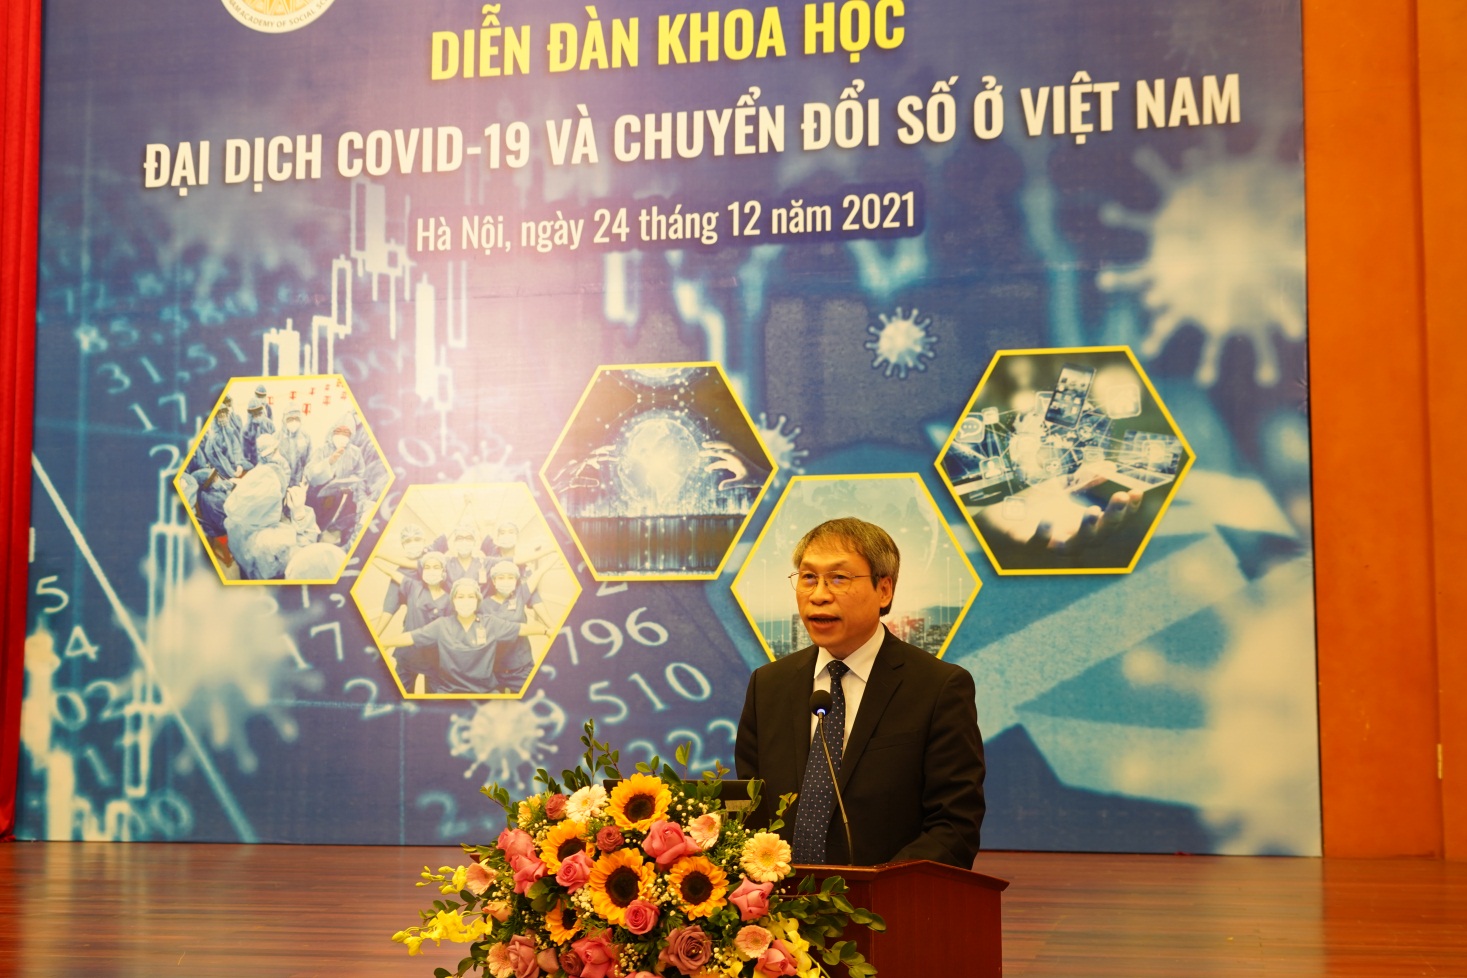 Assoc.Prof.Dr. Bui Quang Tuan, Director of the Vietnam Institute of Economics presented a report at the Forum